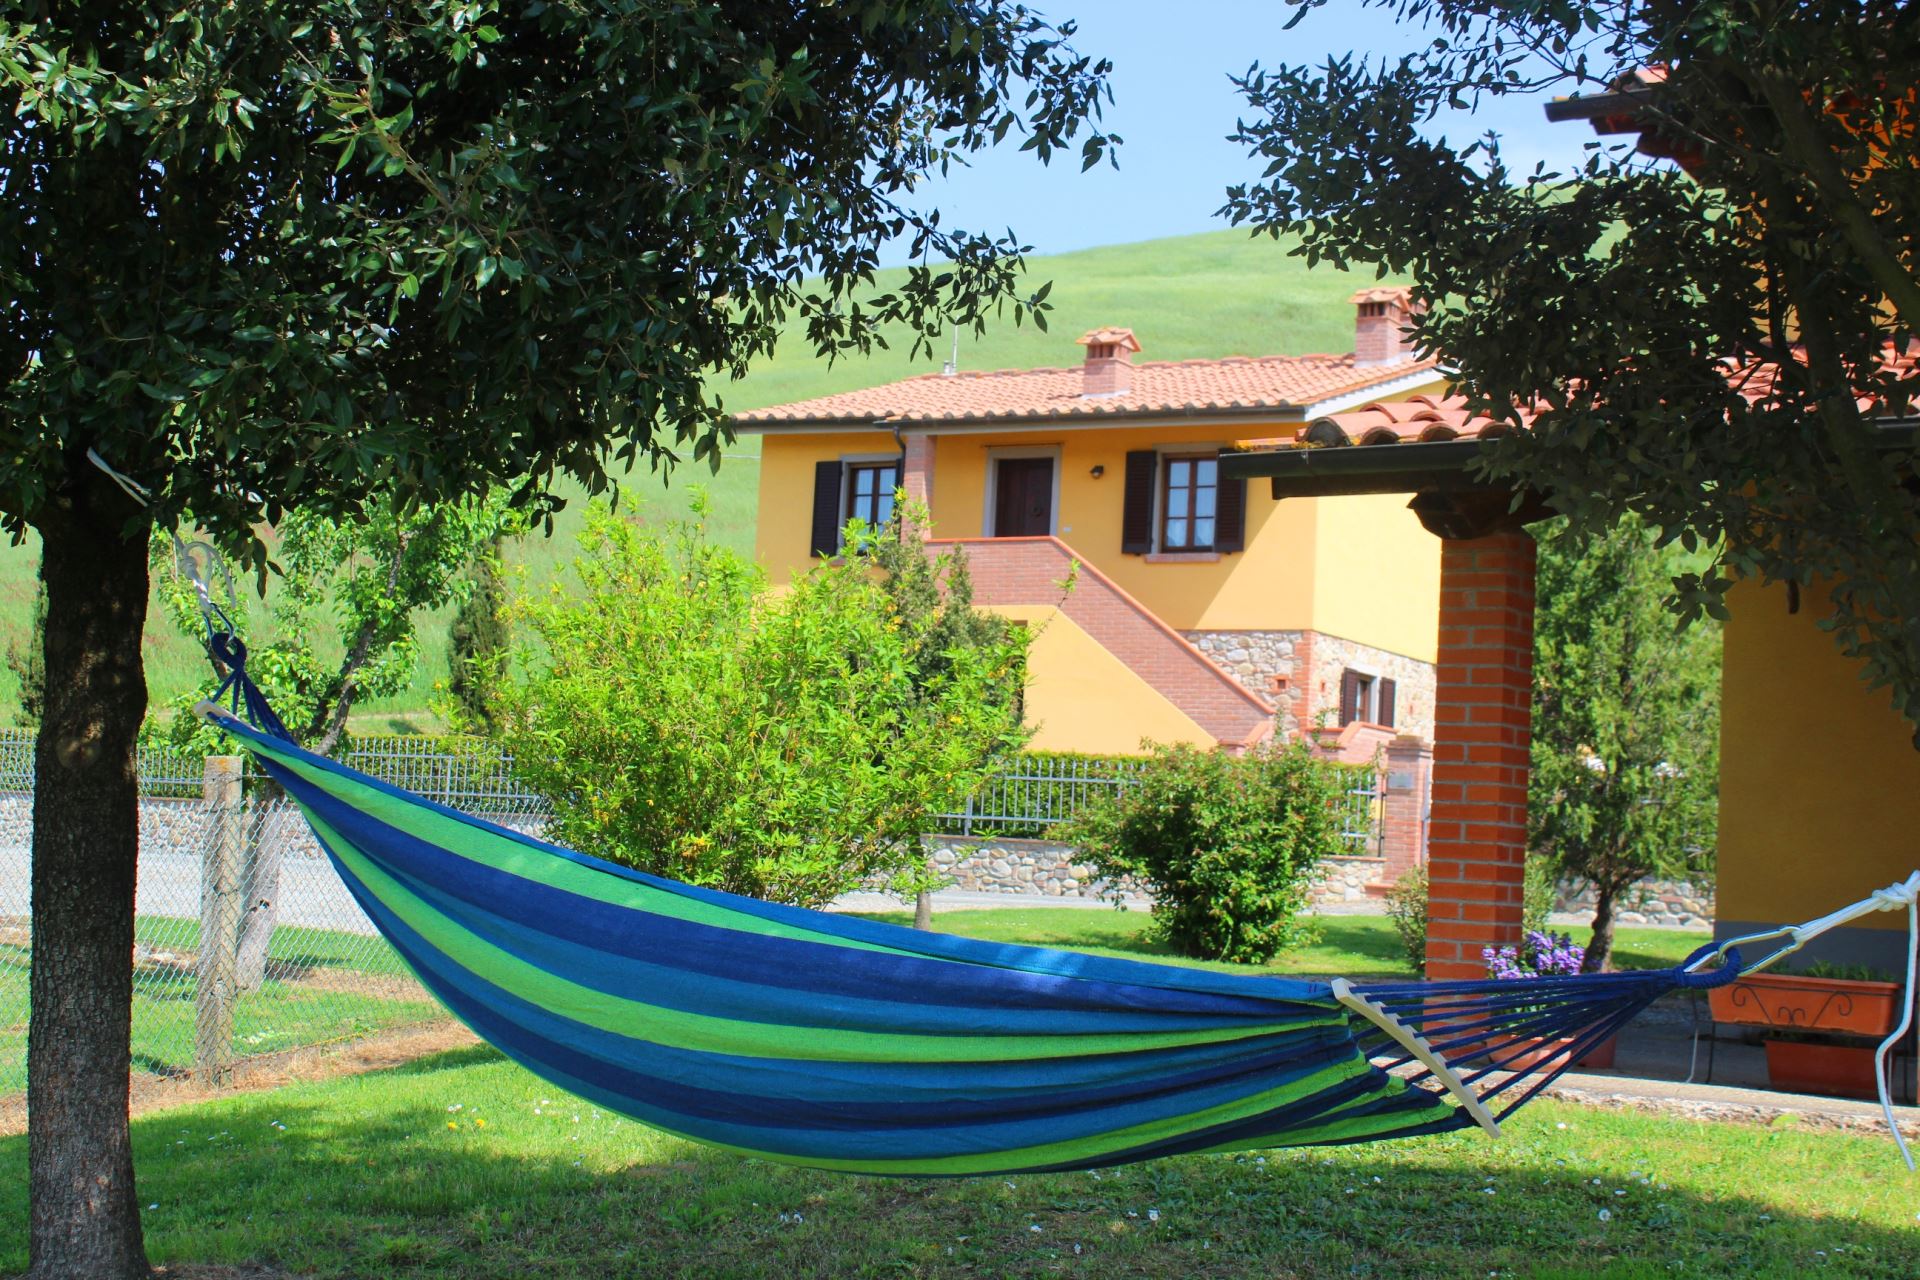 APARTMENTS WITH POOL ONICE VOLTERRA TOSCANA